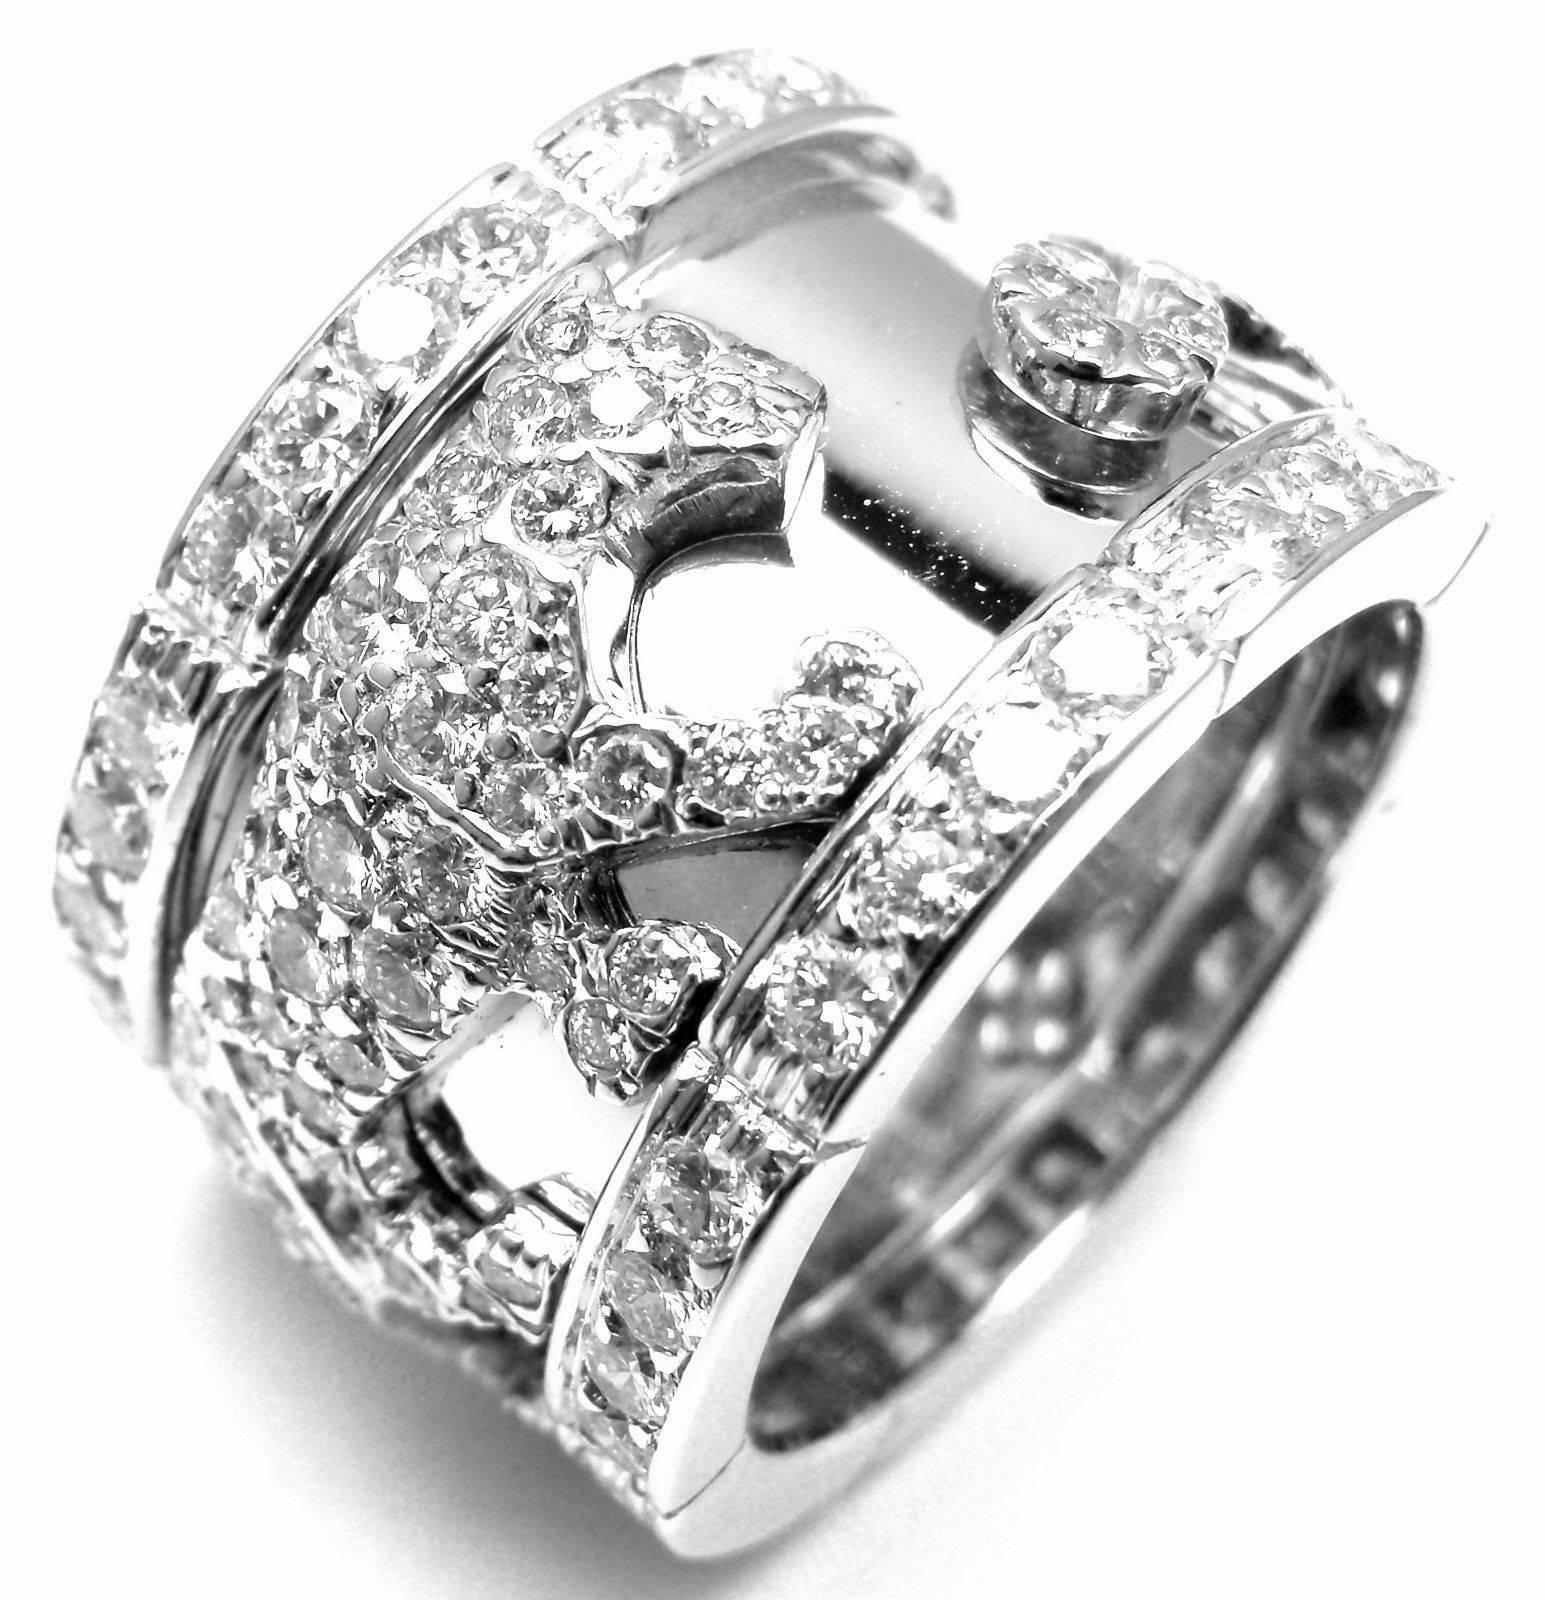 18k White Gold Walking Panther Ring by Cartier. Part of Cartier's Panthere Collection. 

With 176 round brilliant cut diamonds, VVS1 clarity, F color. Total diamond weight: 4CT. 
This ring comes with its original Cartier box. 

Details: 
Ring